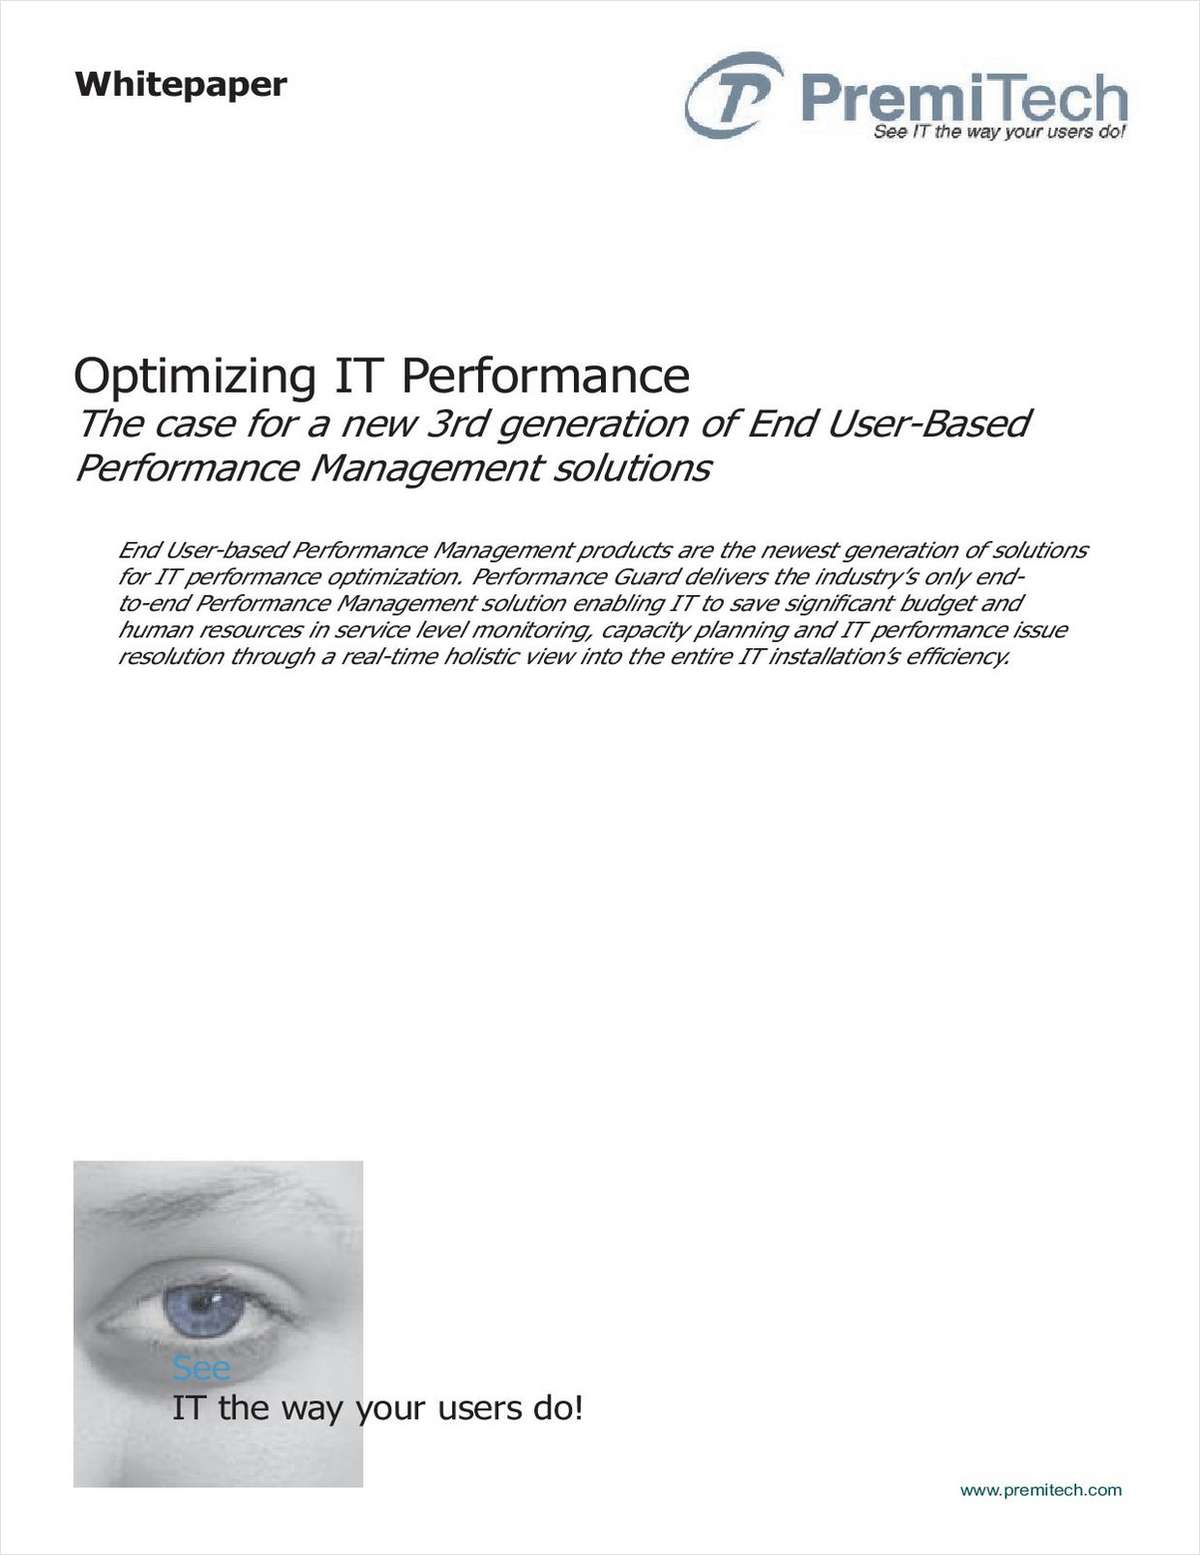 How to Optimize IT Performance with End User-Based Solutions